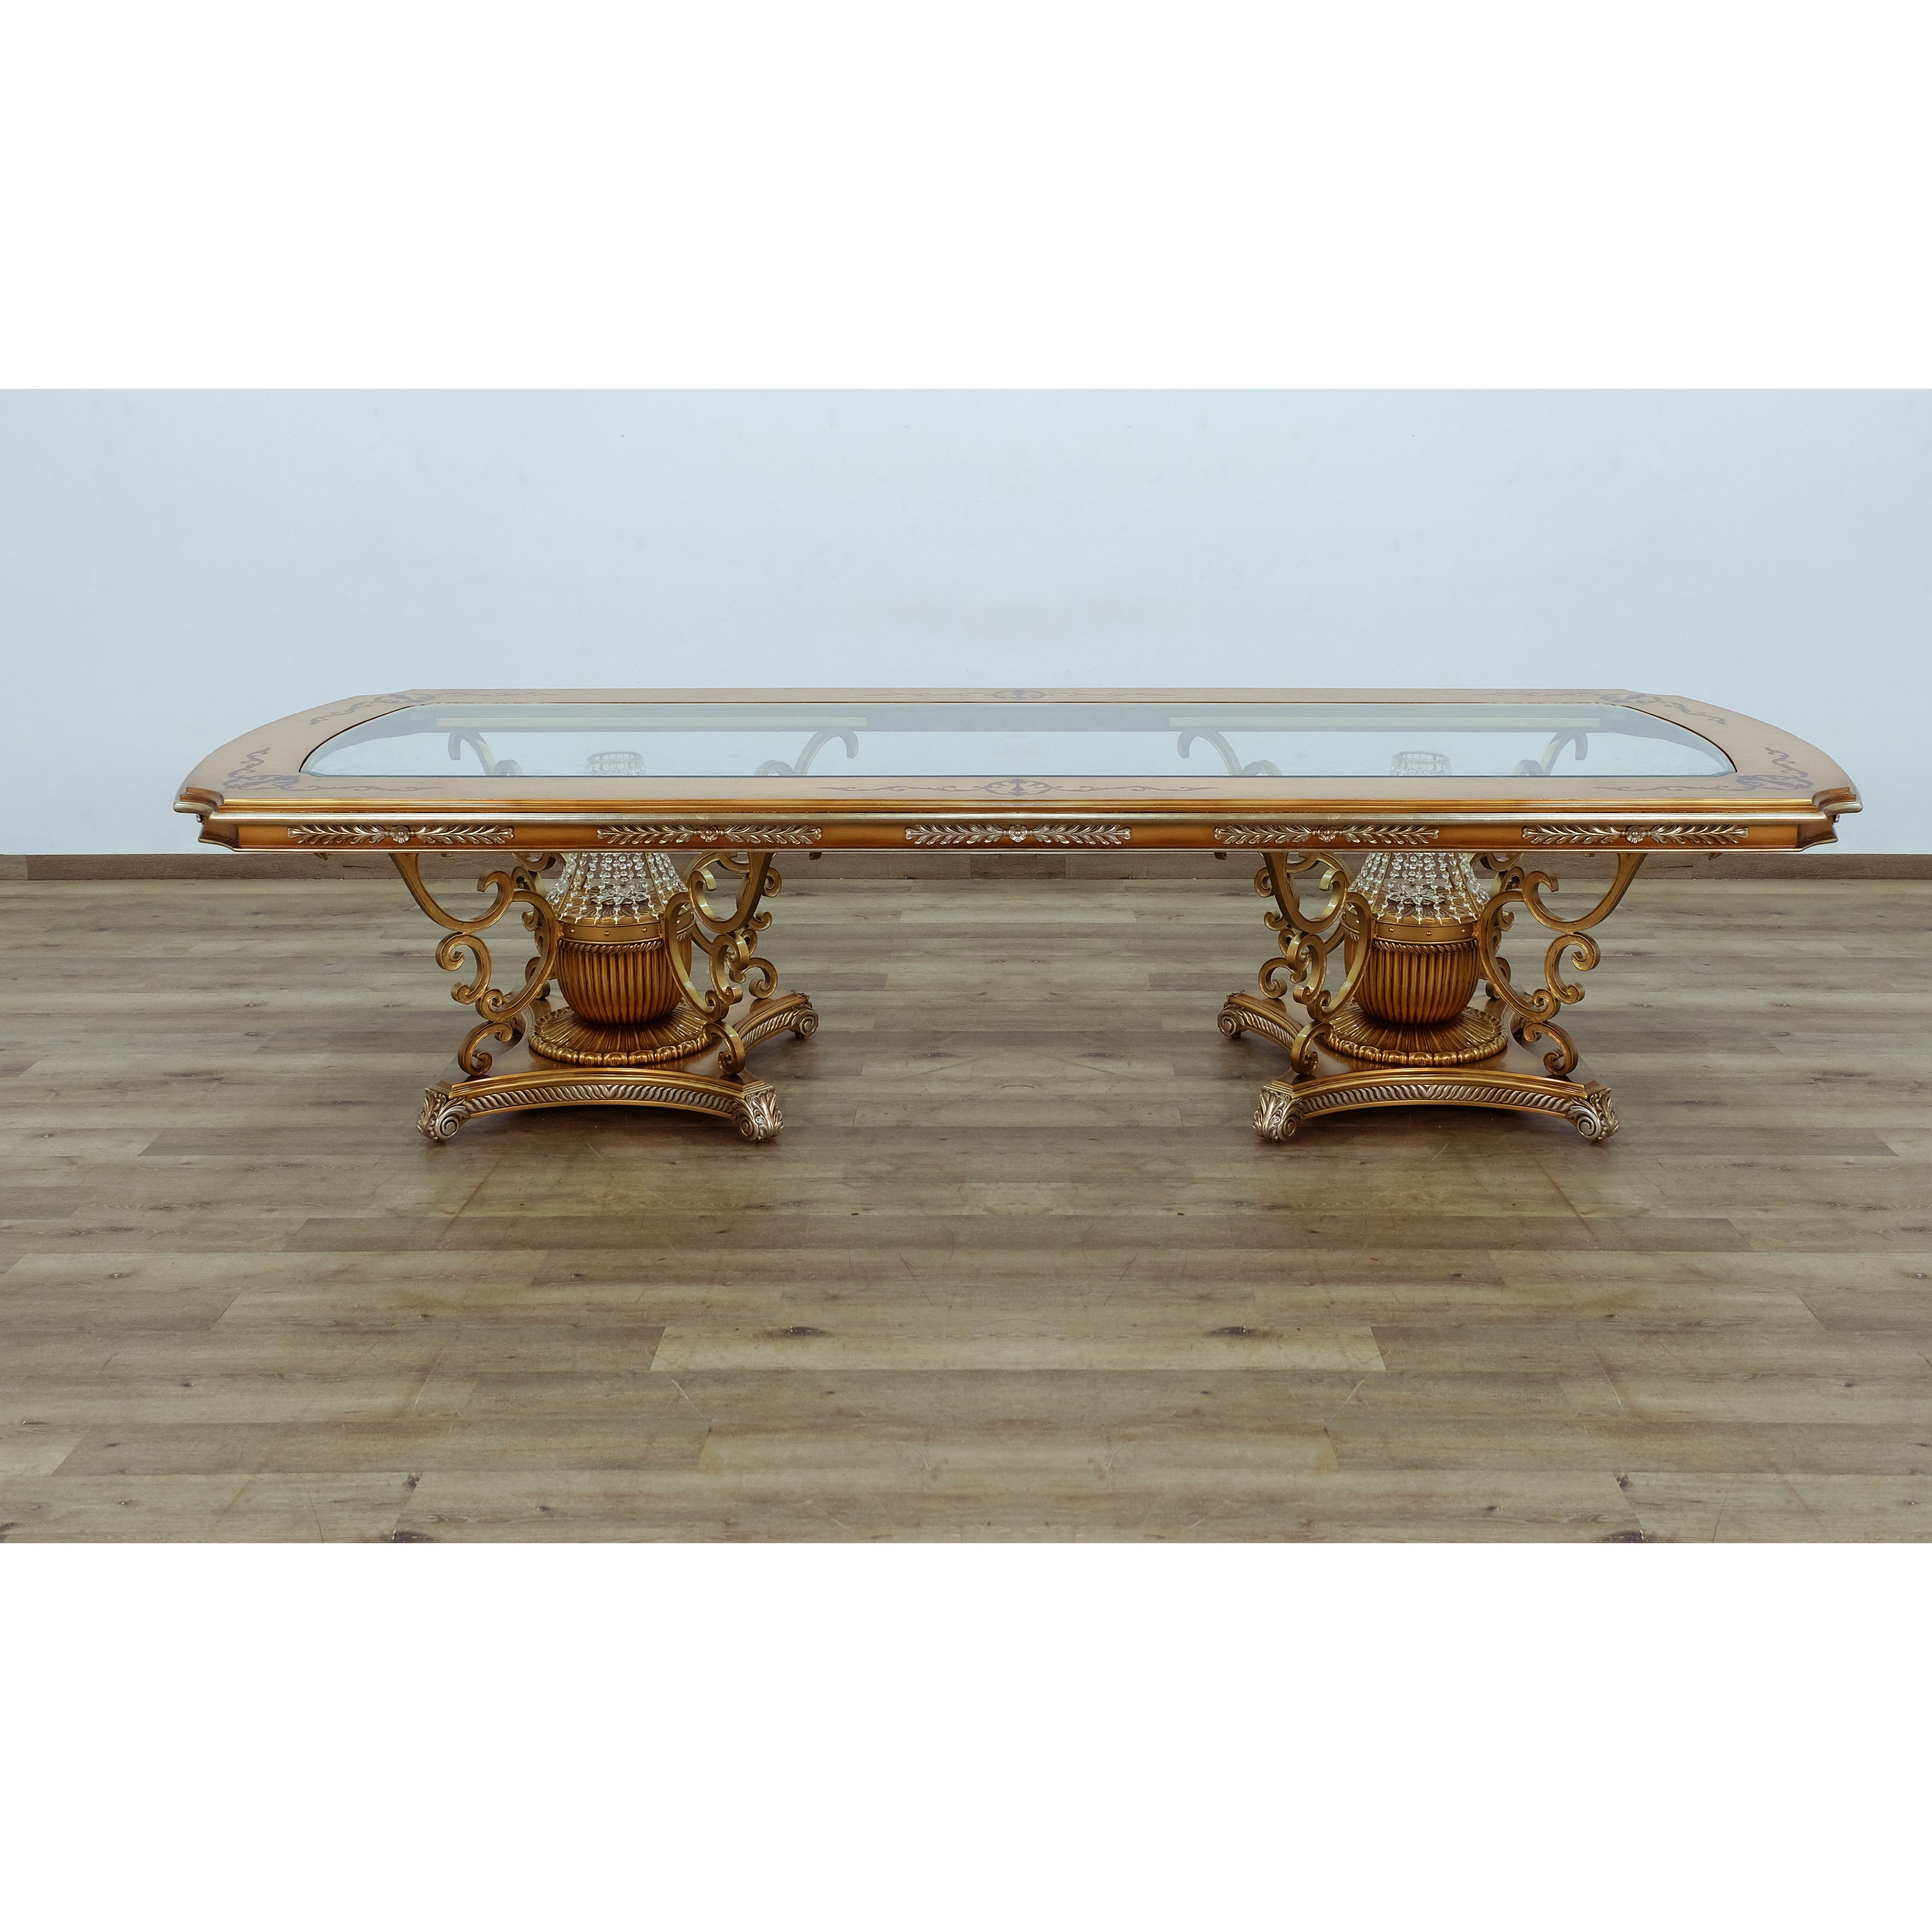 European Furniture - Saint Germain Dining Table in Light Gold & Antique Silver - 35550-DT - New Star Living